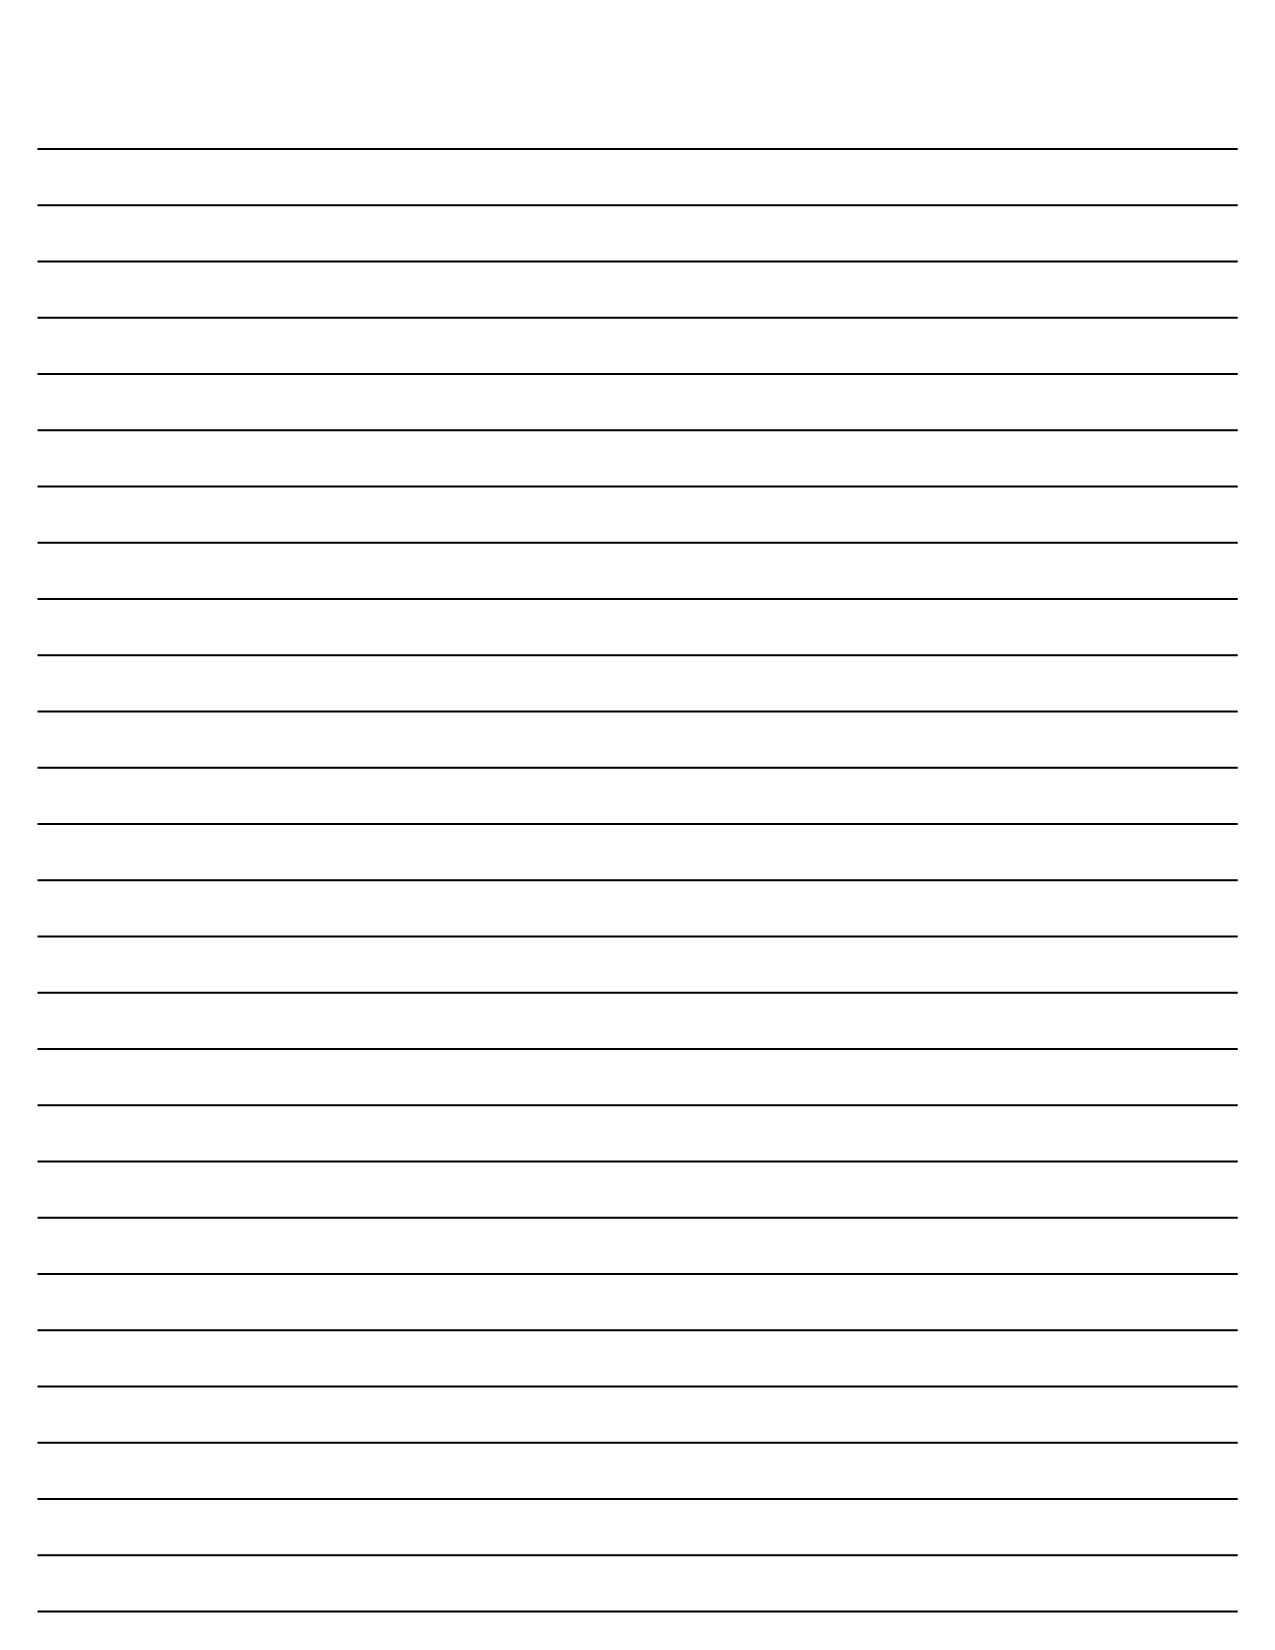 Free Printable Lined Page